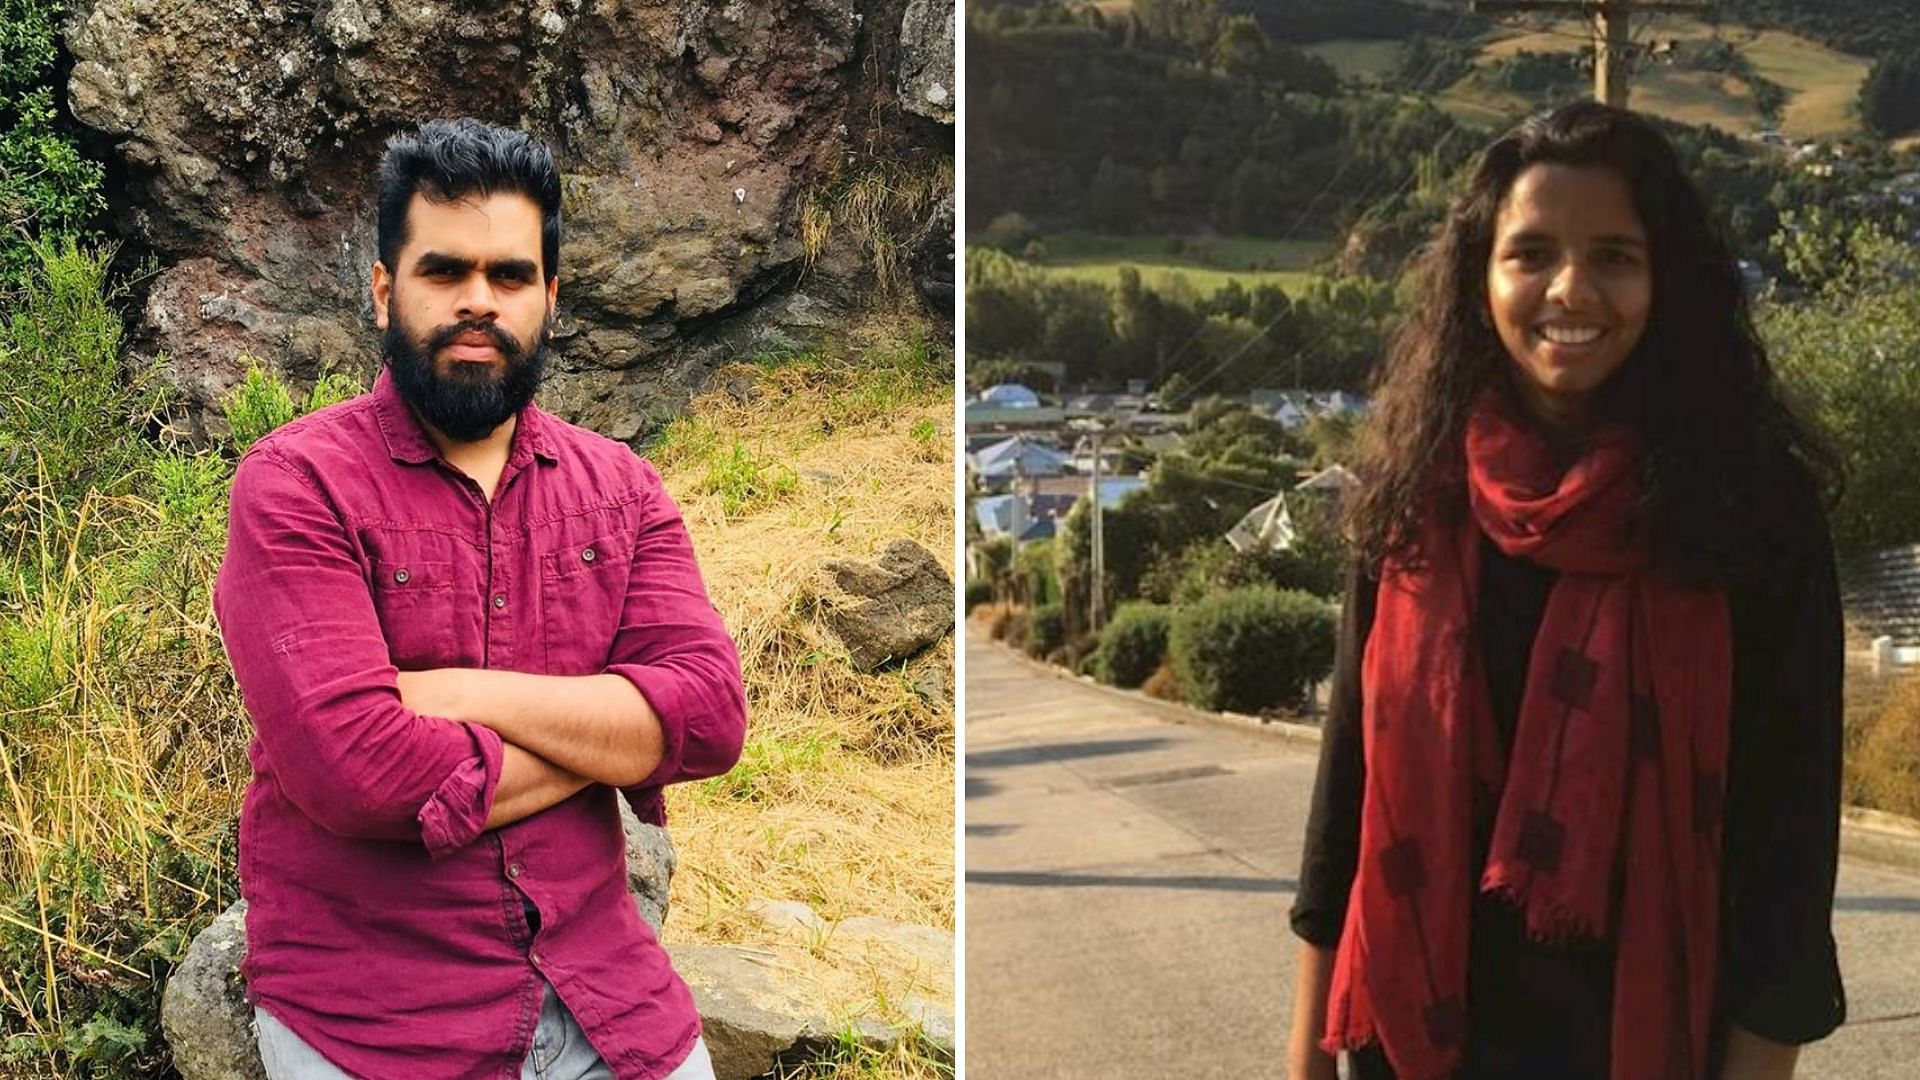 For the Indian couple Abdul Nazer and Ansi Alibava, life in New Zealand was peaceful until 15 March mass shootings.